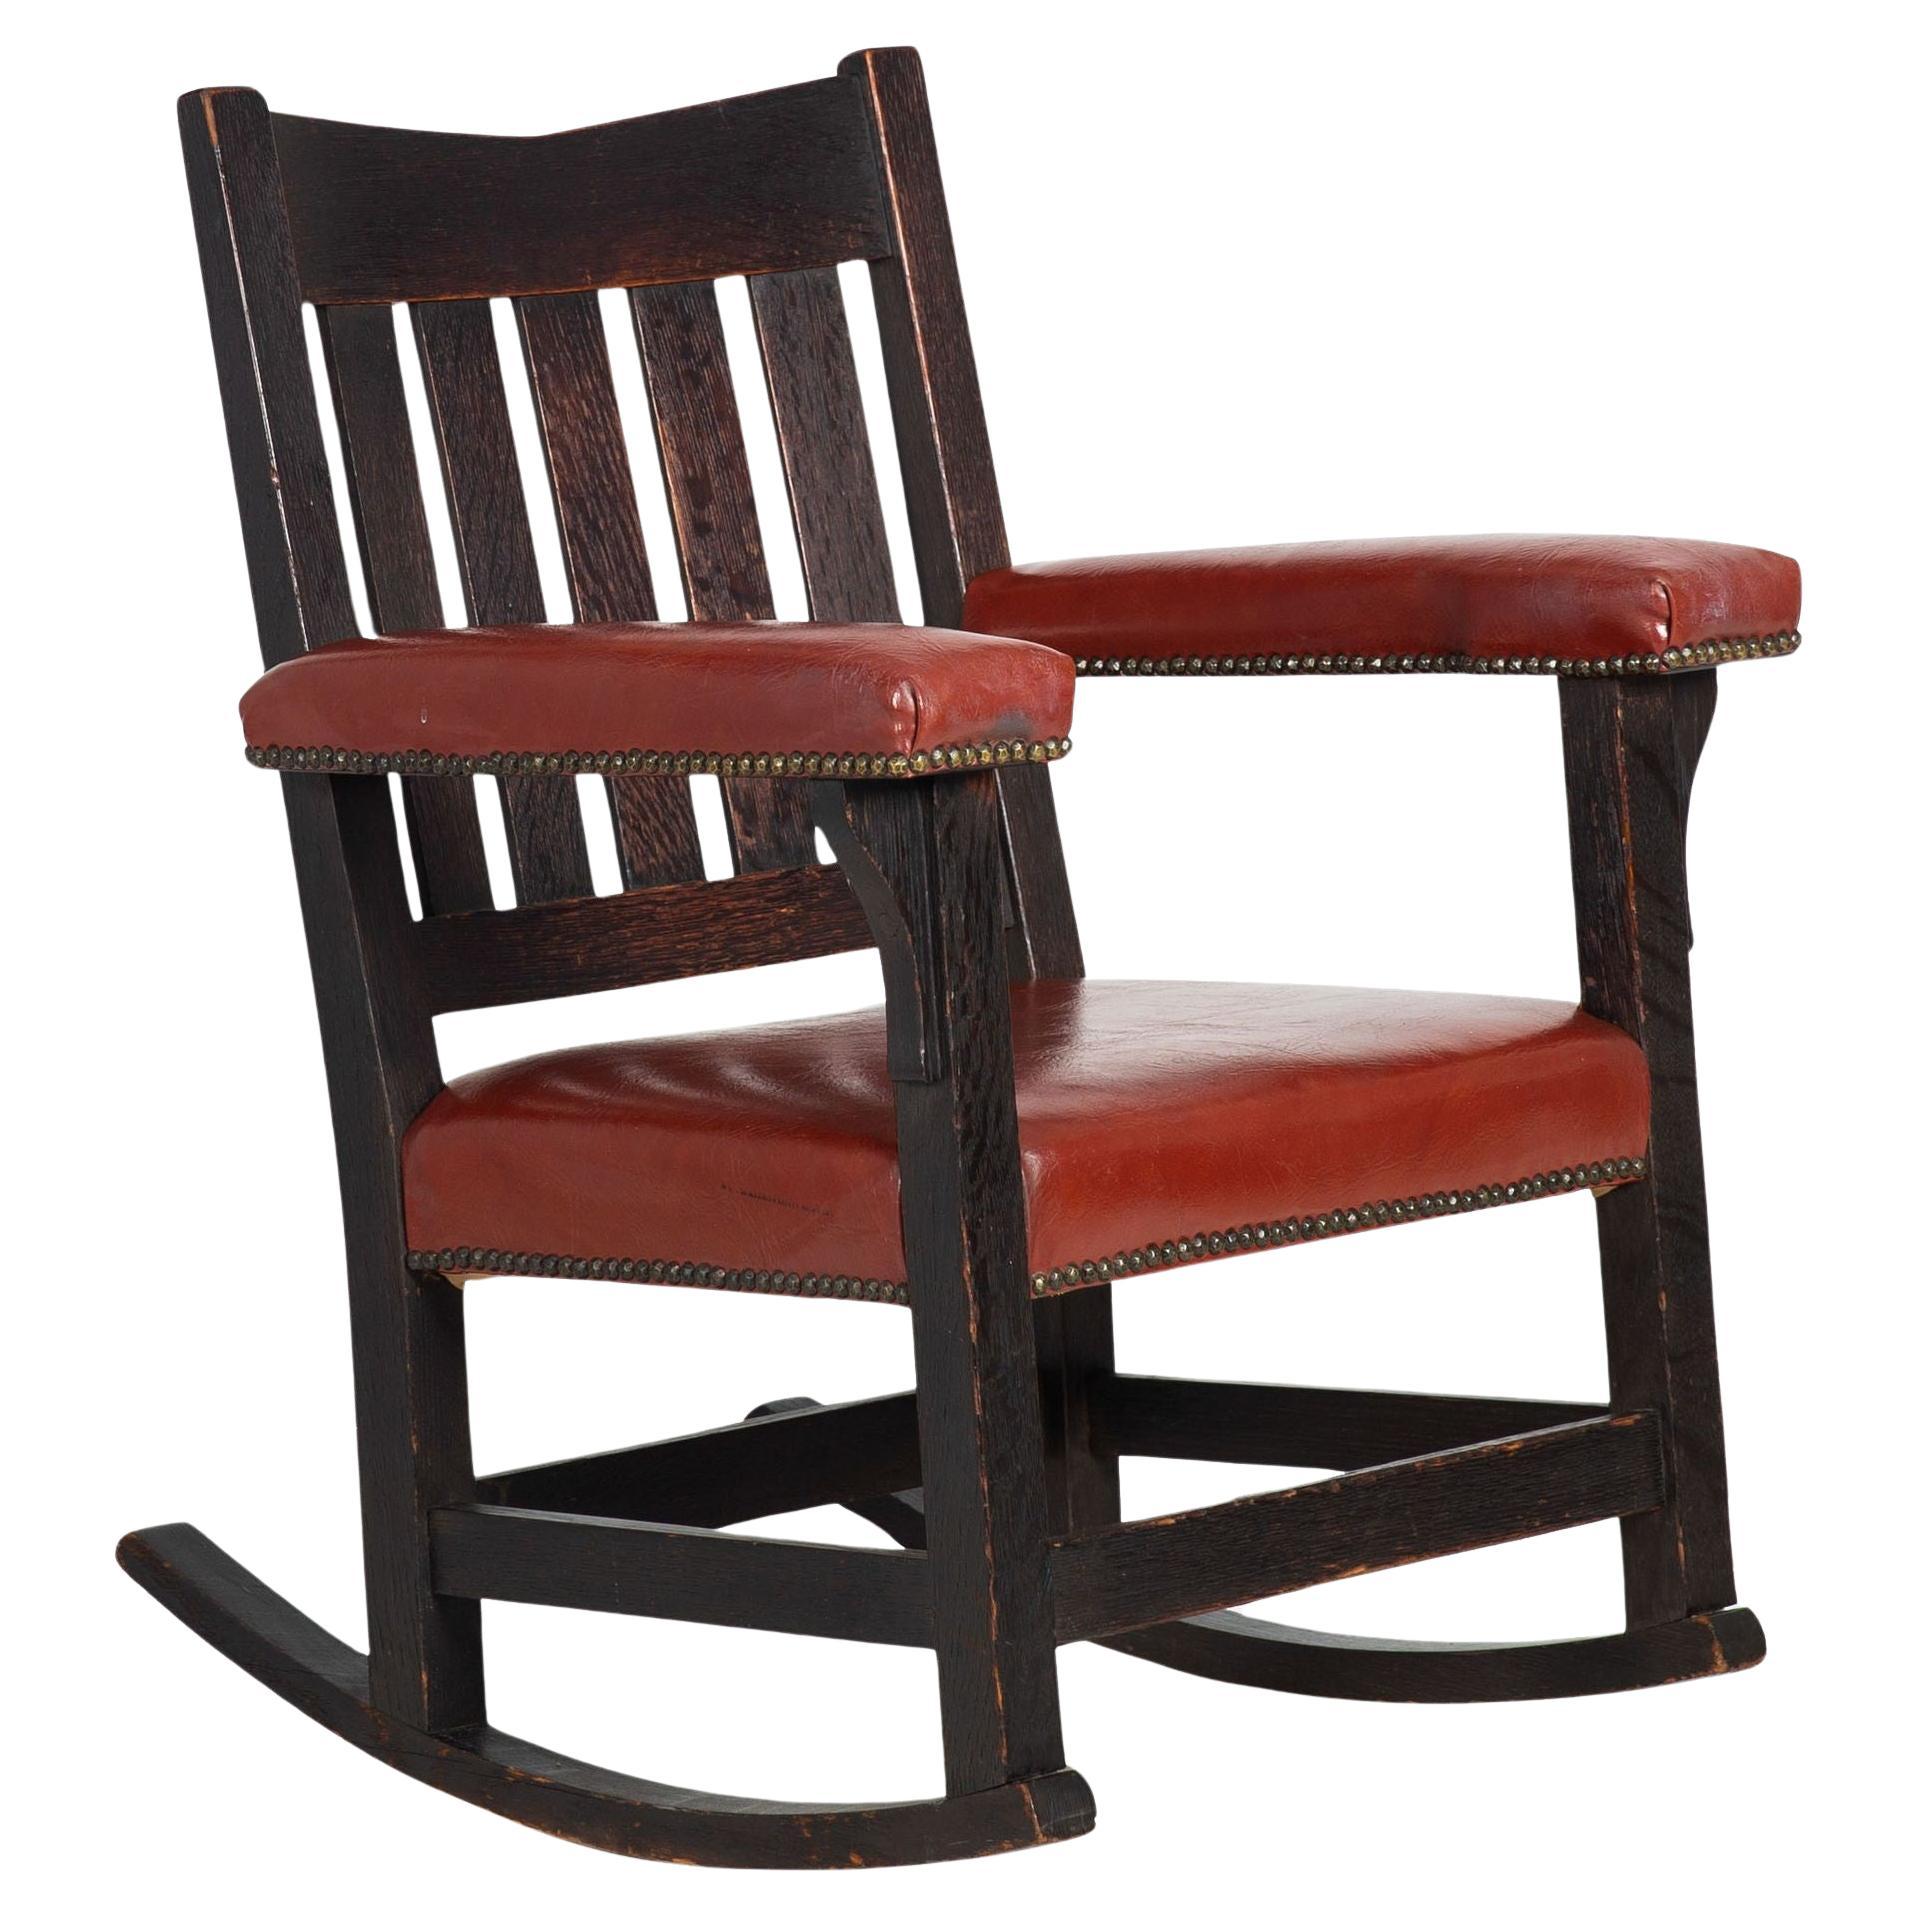 Arts & Crafts Fumed Oak Rocking Chair by Gustave Stickley, no. 311 1/2 For Sale